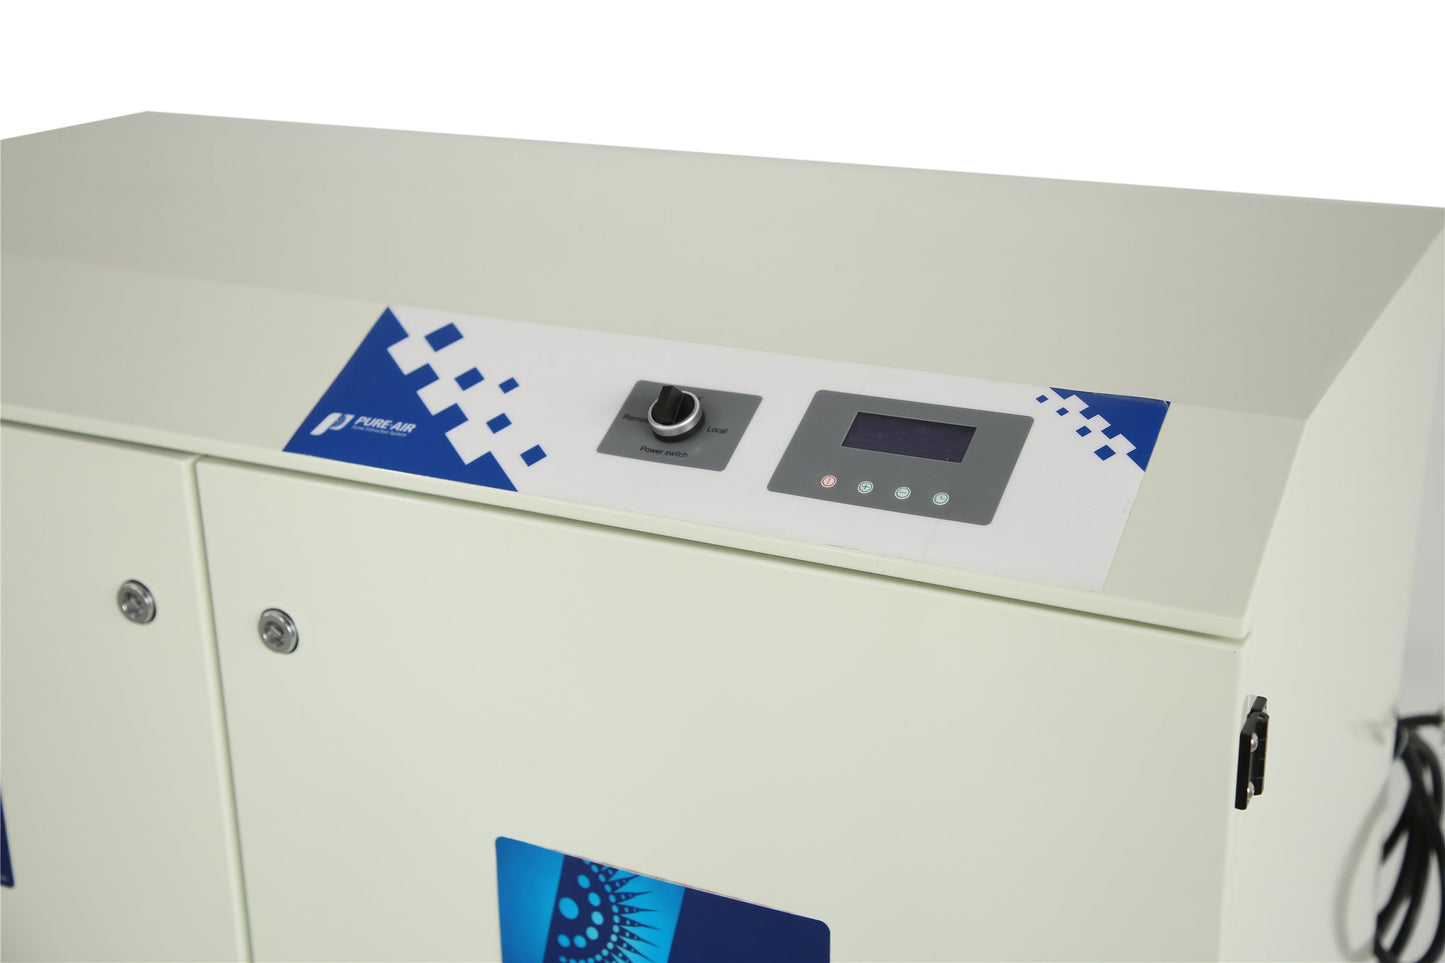 Fume Extraction Units for Co2 Laser Cutters - Cutting Plastics and Fabrics